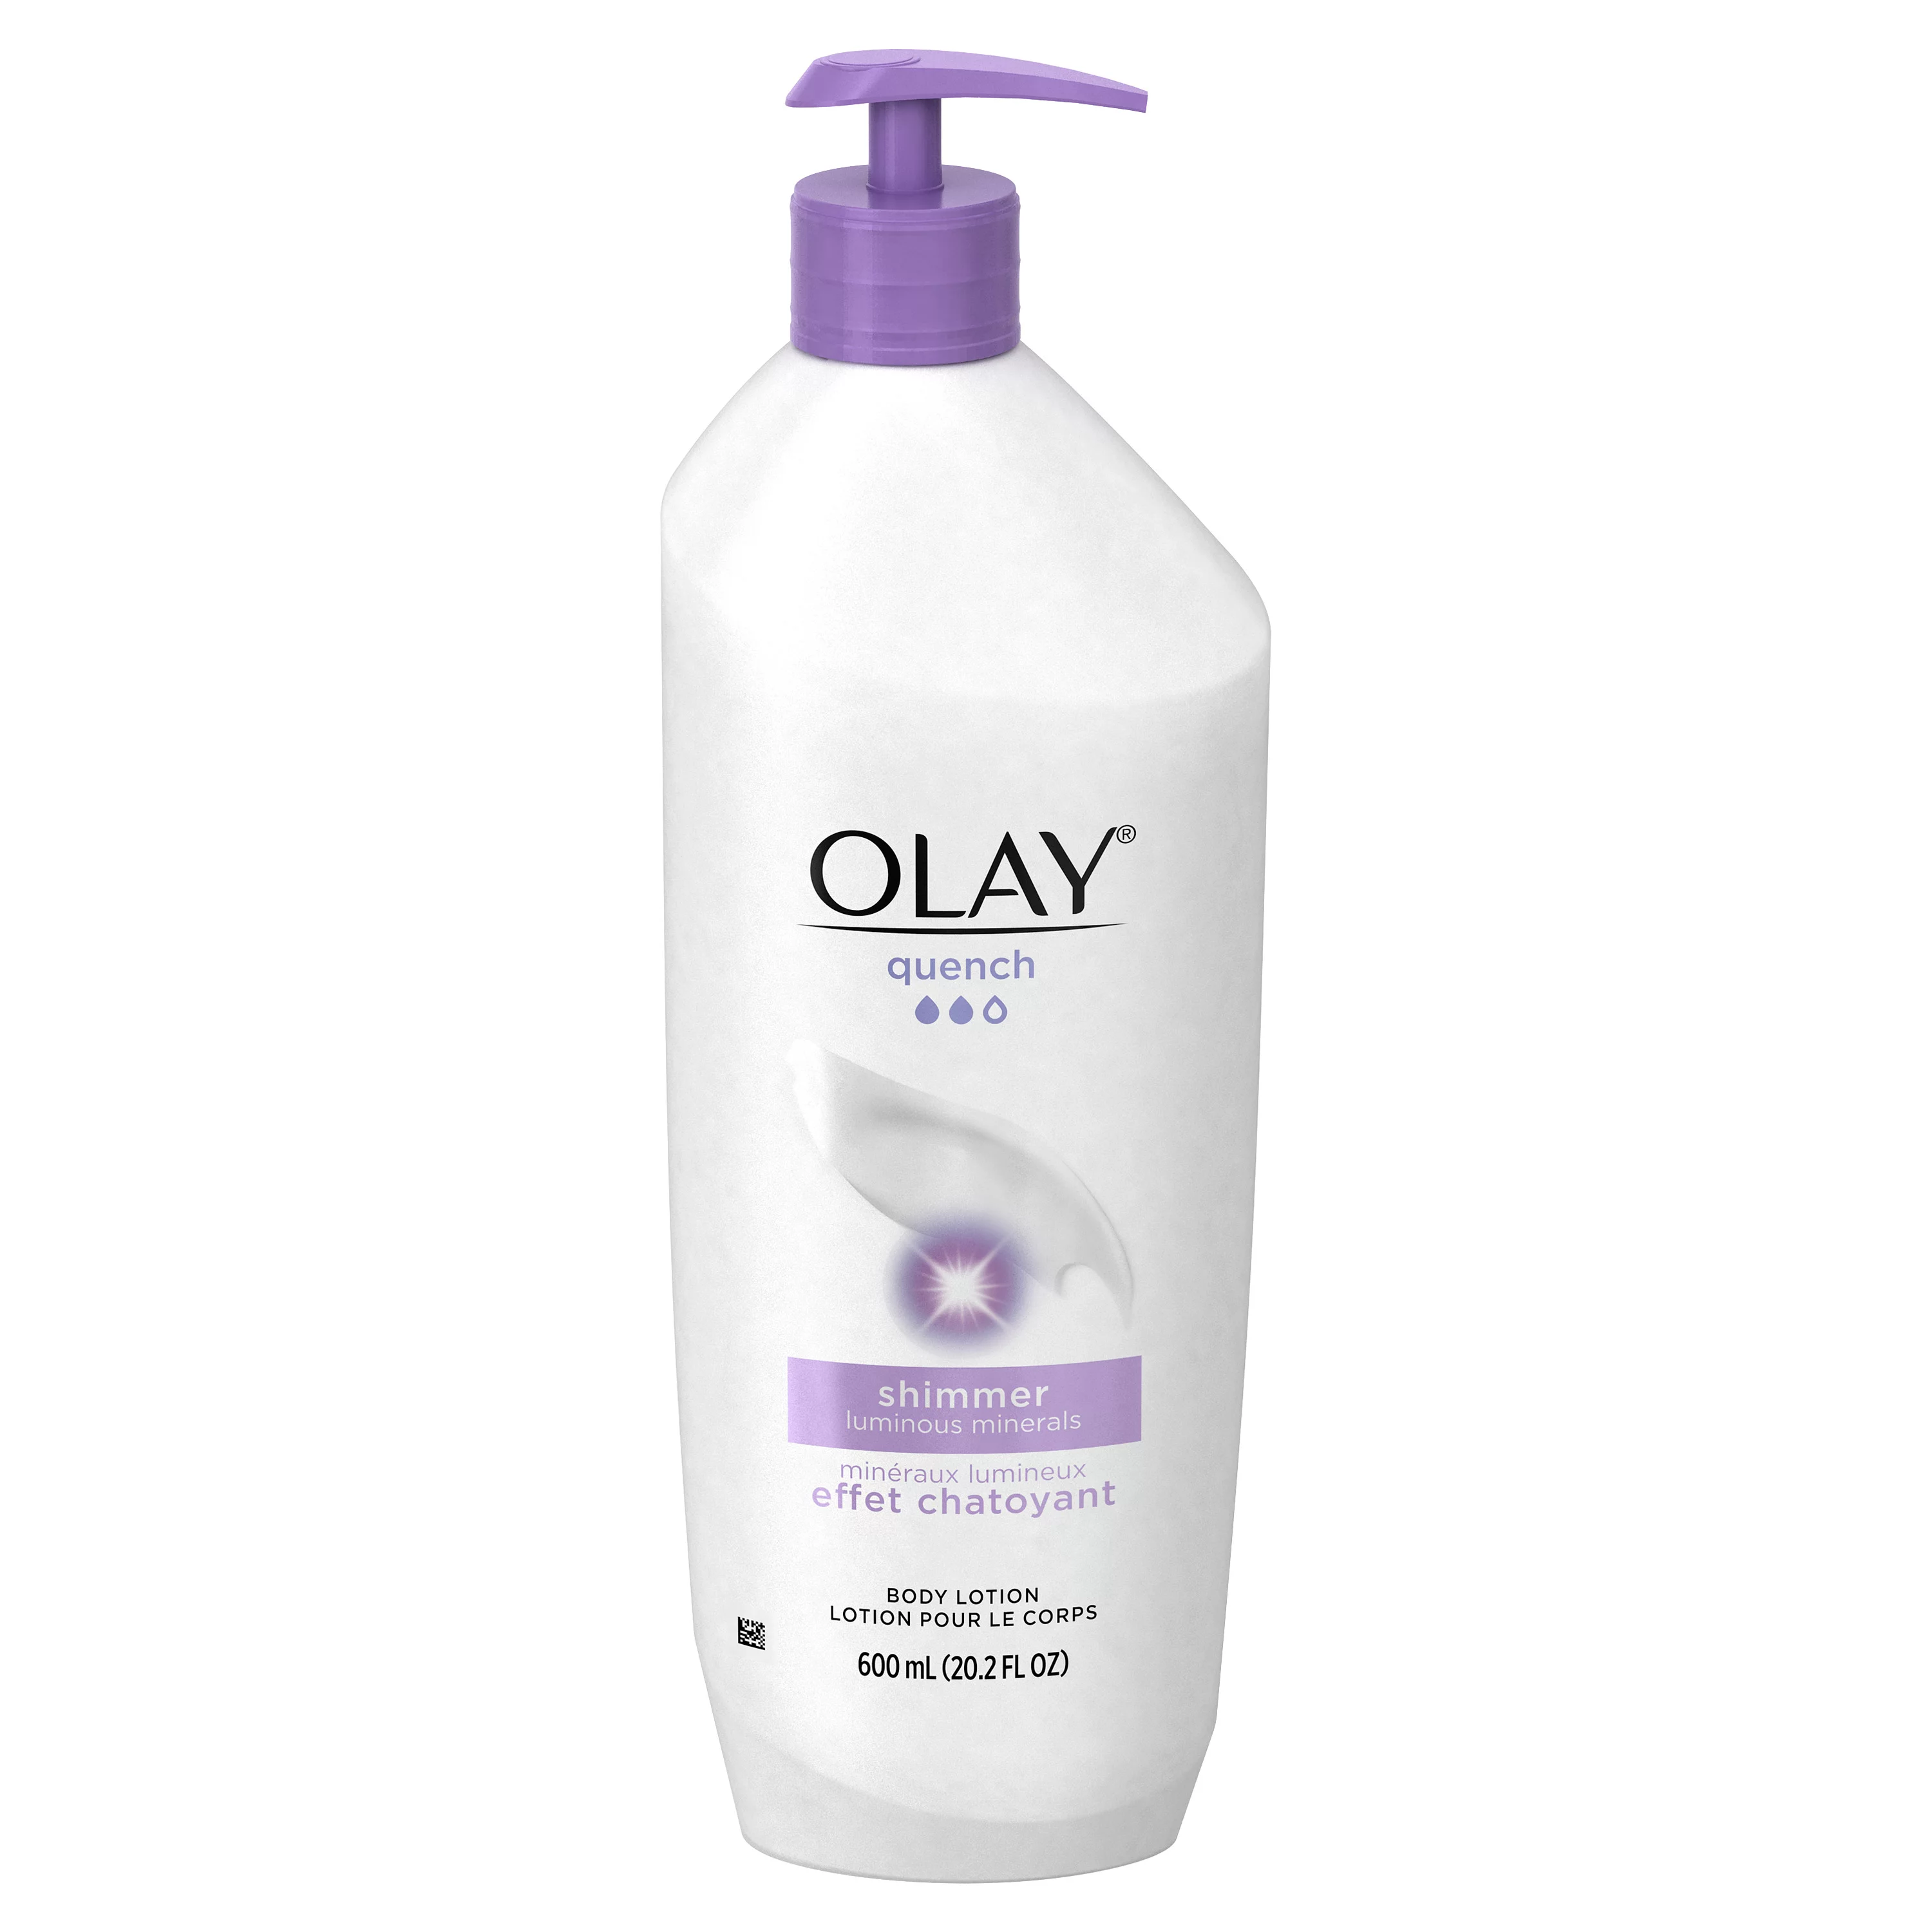 Olay Quench Shimmer Body Lotion for Women, 20.2 fl. Oz